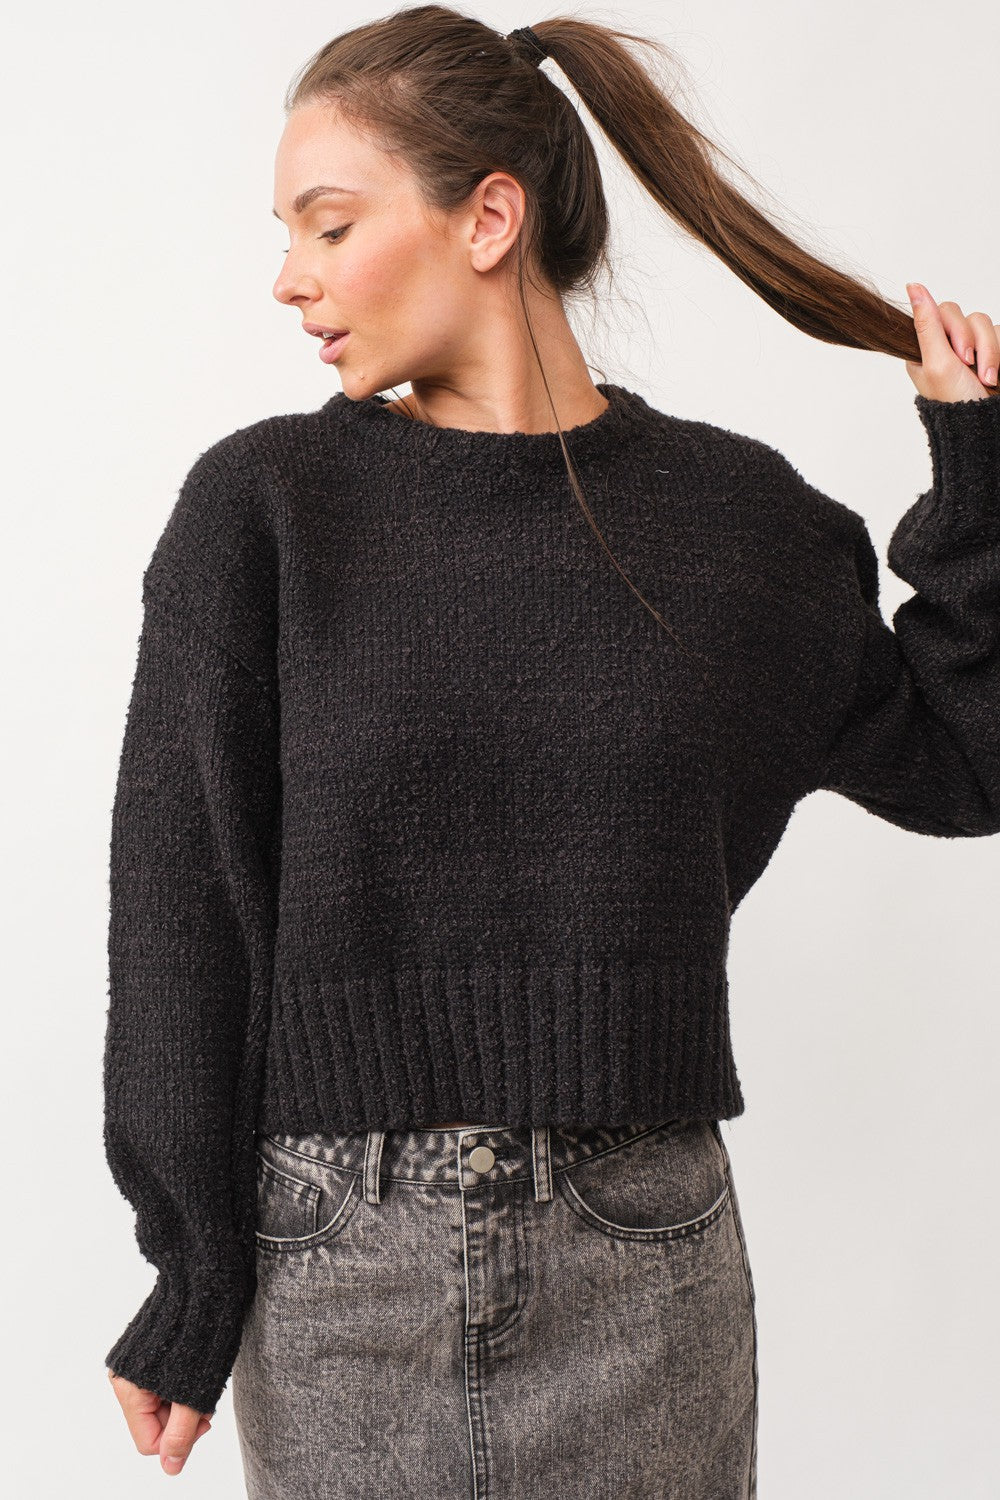 everlee soft touch sweater